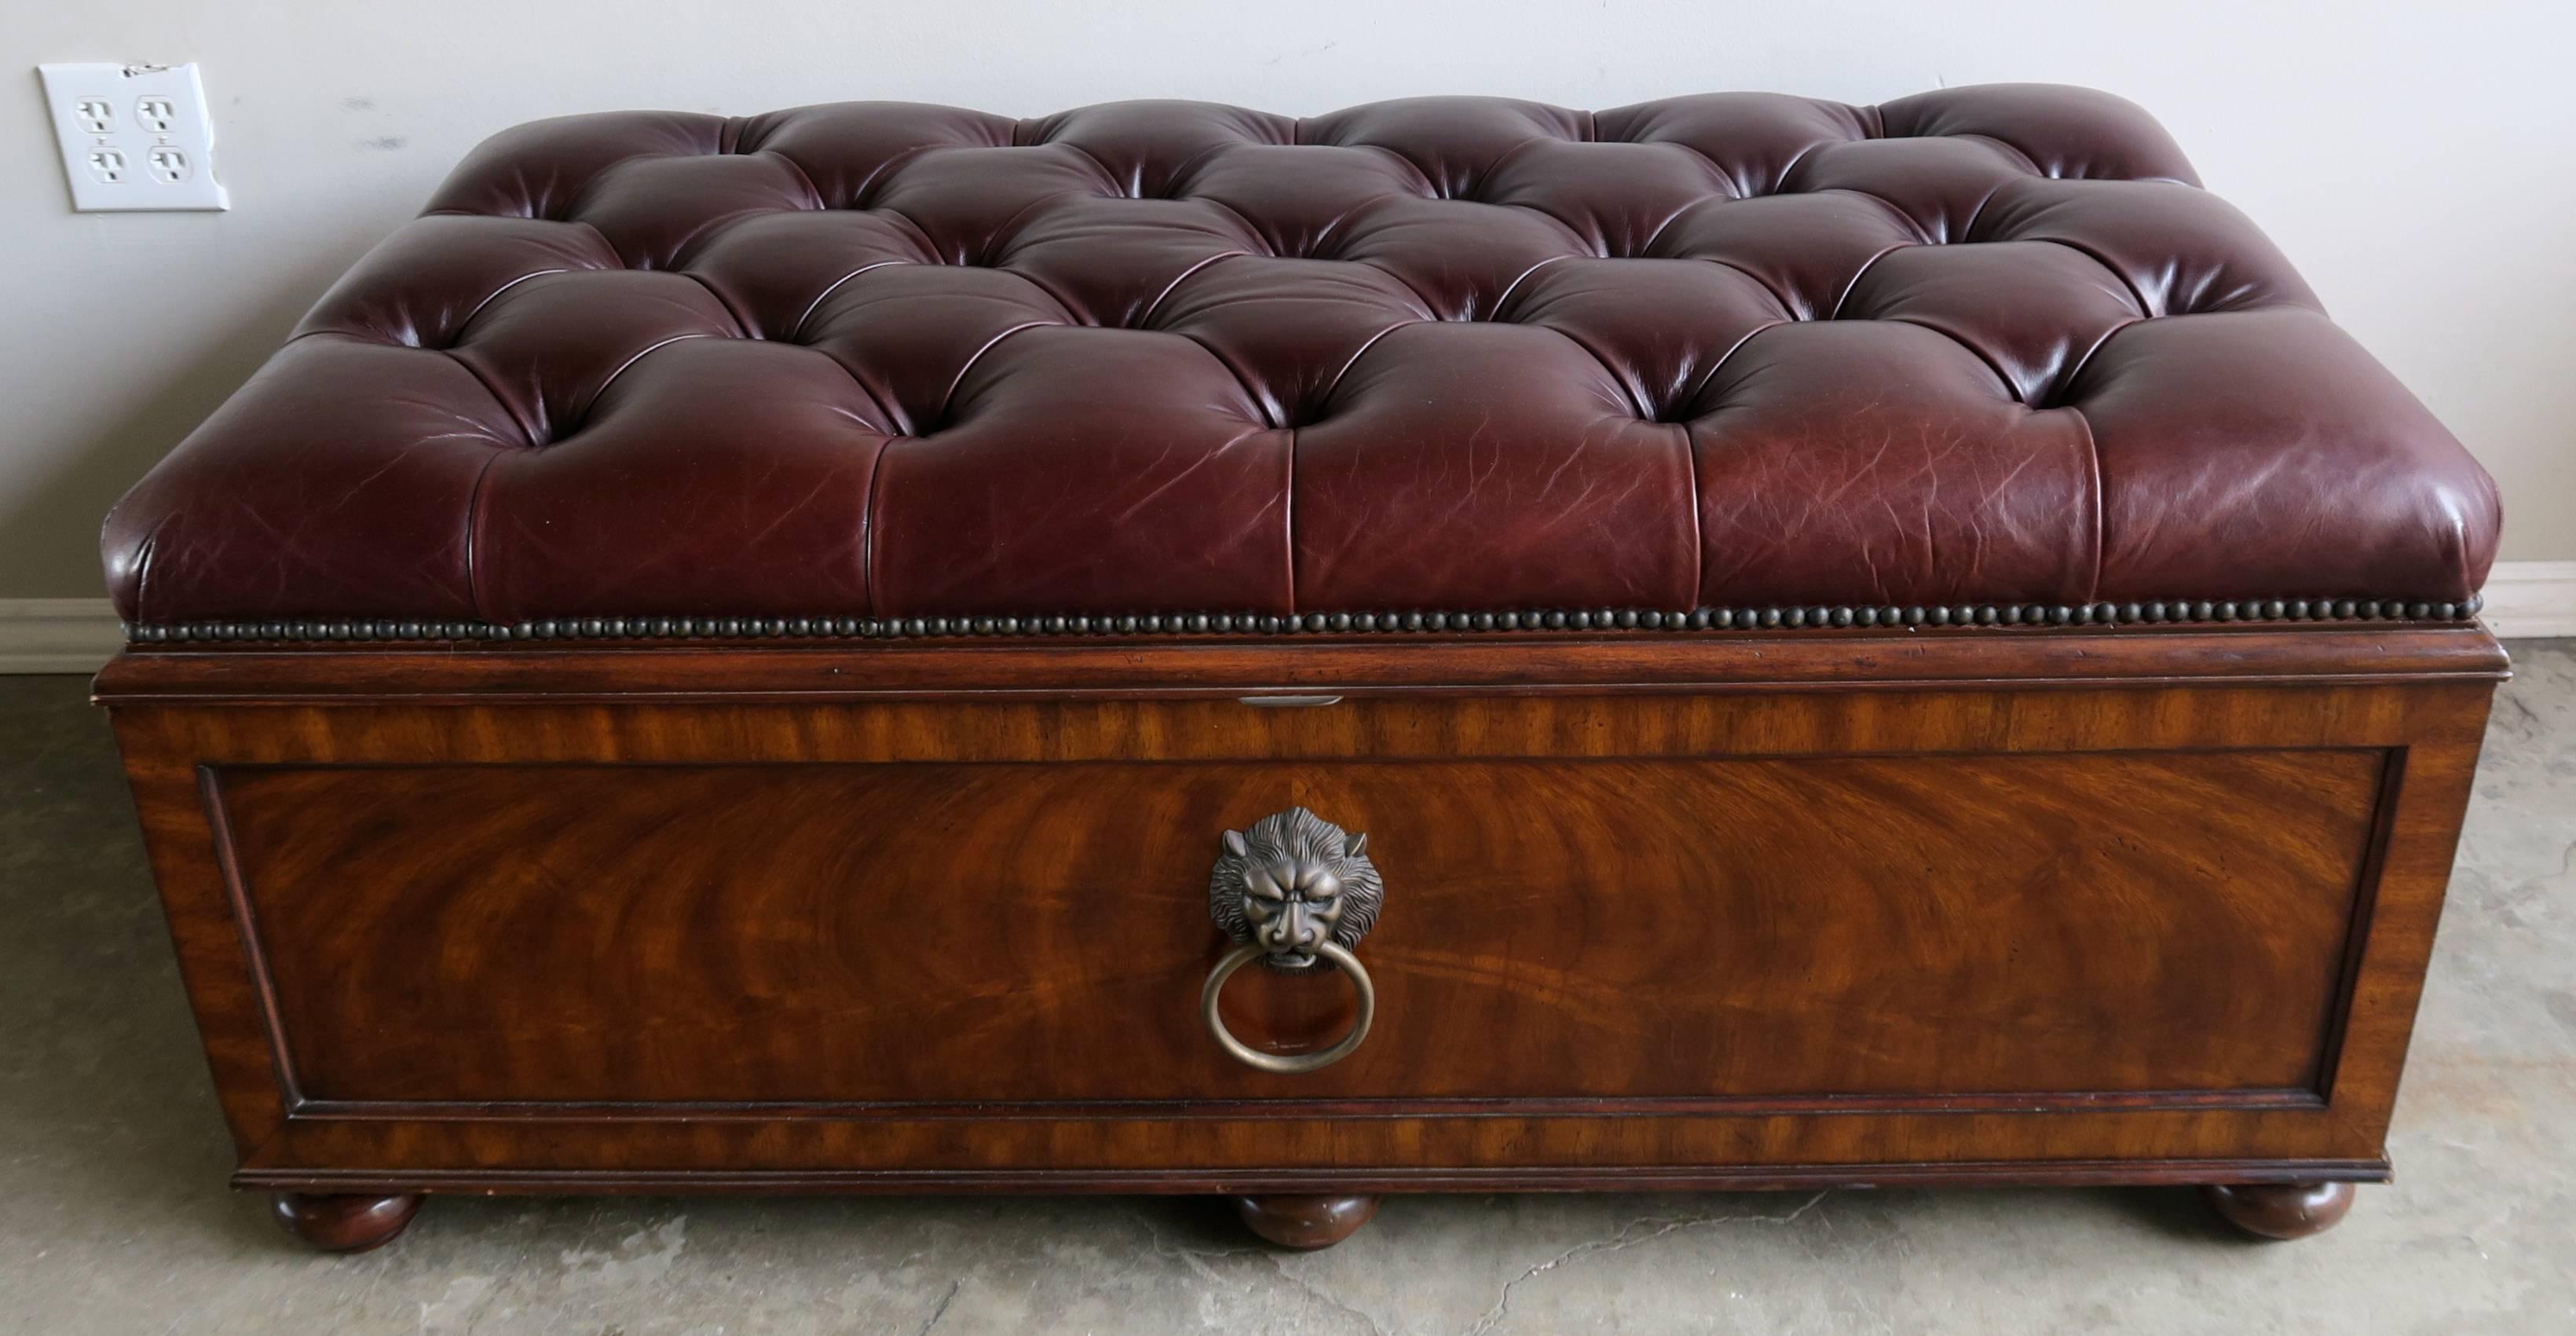 Other English Mahogany Leather Tufted Trunk or Bench